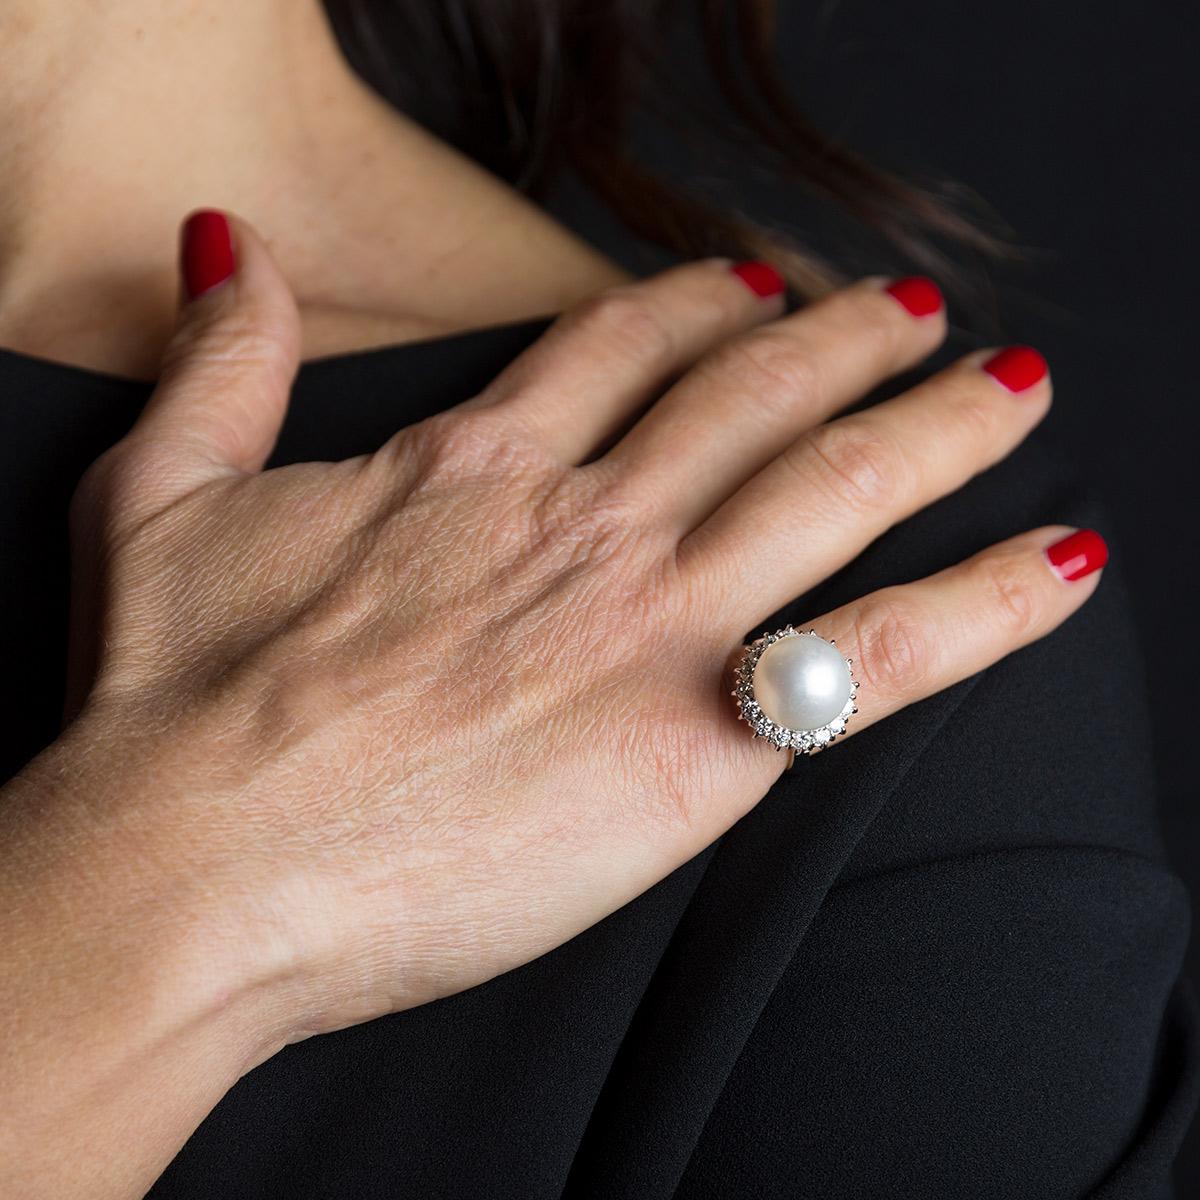 Handmade 18 kt white gold ring with a 13.5 mm Australian white pearl surrounded by diamonds totaling 1.18 ct.
The execution of the jewel is done by hand in our workshop by Italian goldsmiths and it is a unique piece.
We are committed to providing a